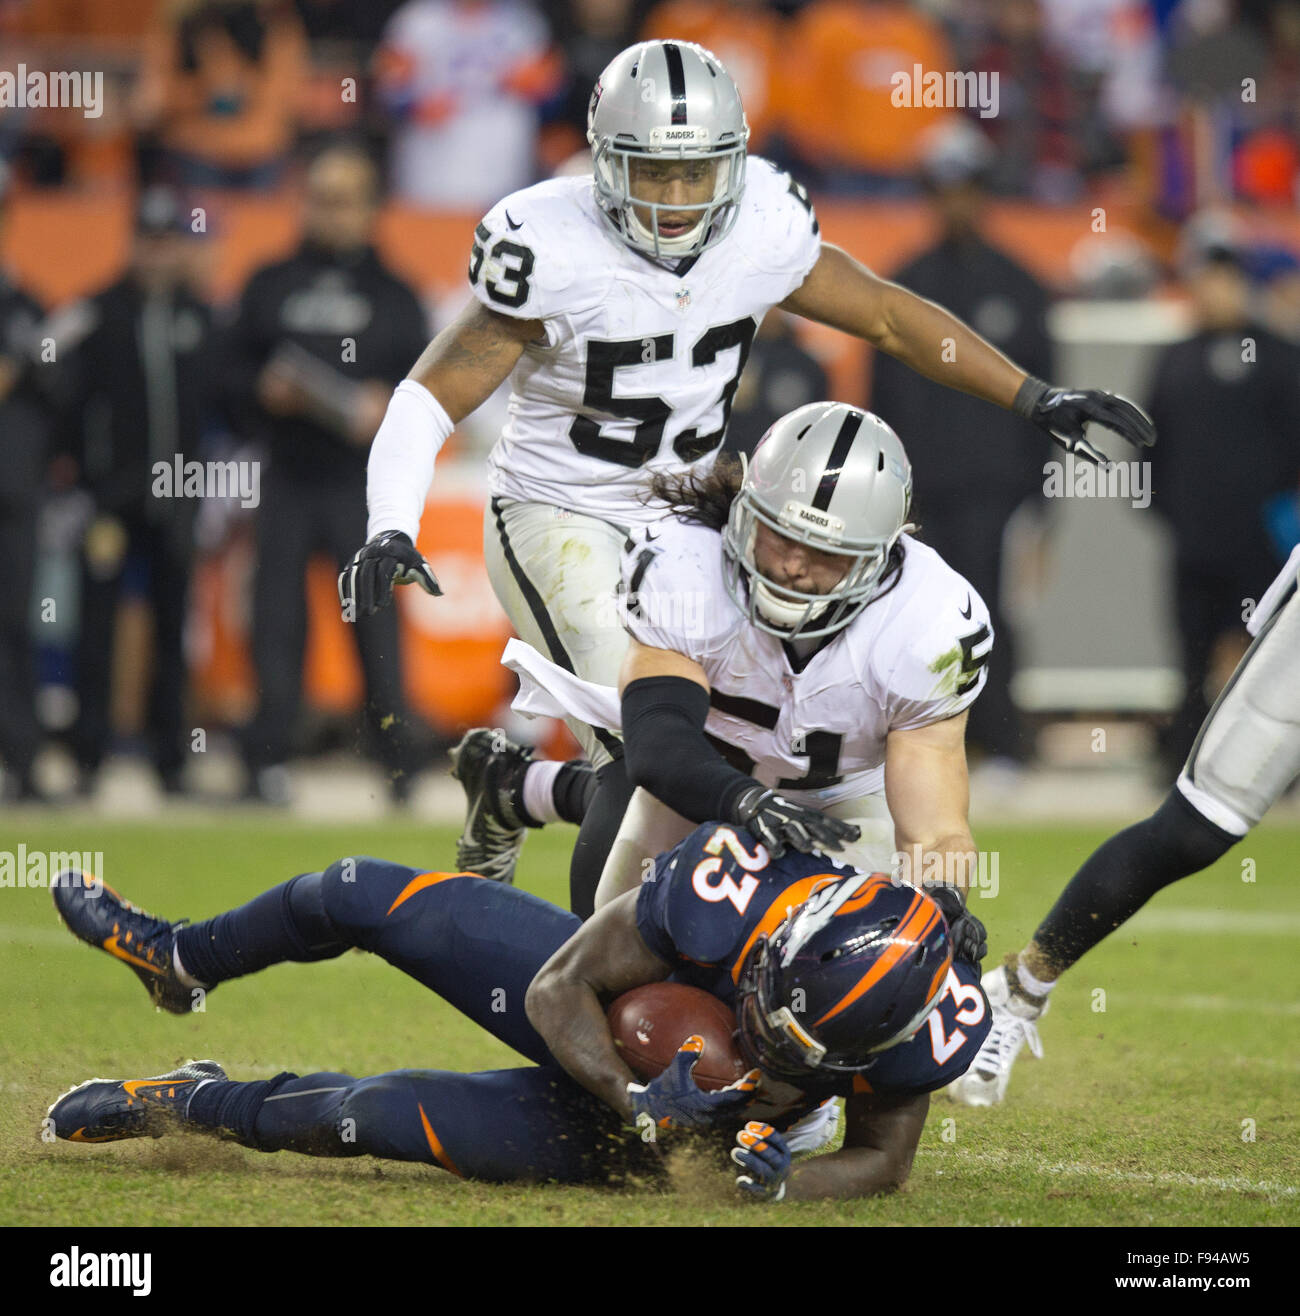 Denver, Colorado, USA. 13th Dec, 2015. Broncos RB RONNIE HILLMAN, bottom, gets tackled by Raiders LB BEN HEENEY, center, during the 2nd. Half at Sports Authority Field at Mile High Sunday afternoon. The Raiders beat the Broncos 15-12. Credit:  Hector Acevedo/ZUMA Wire/Alamy Live News Stock Photo